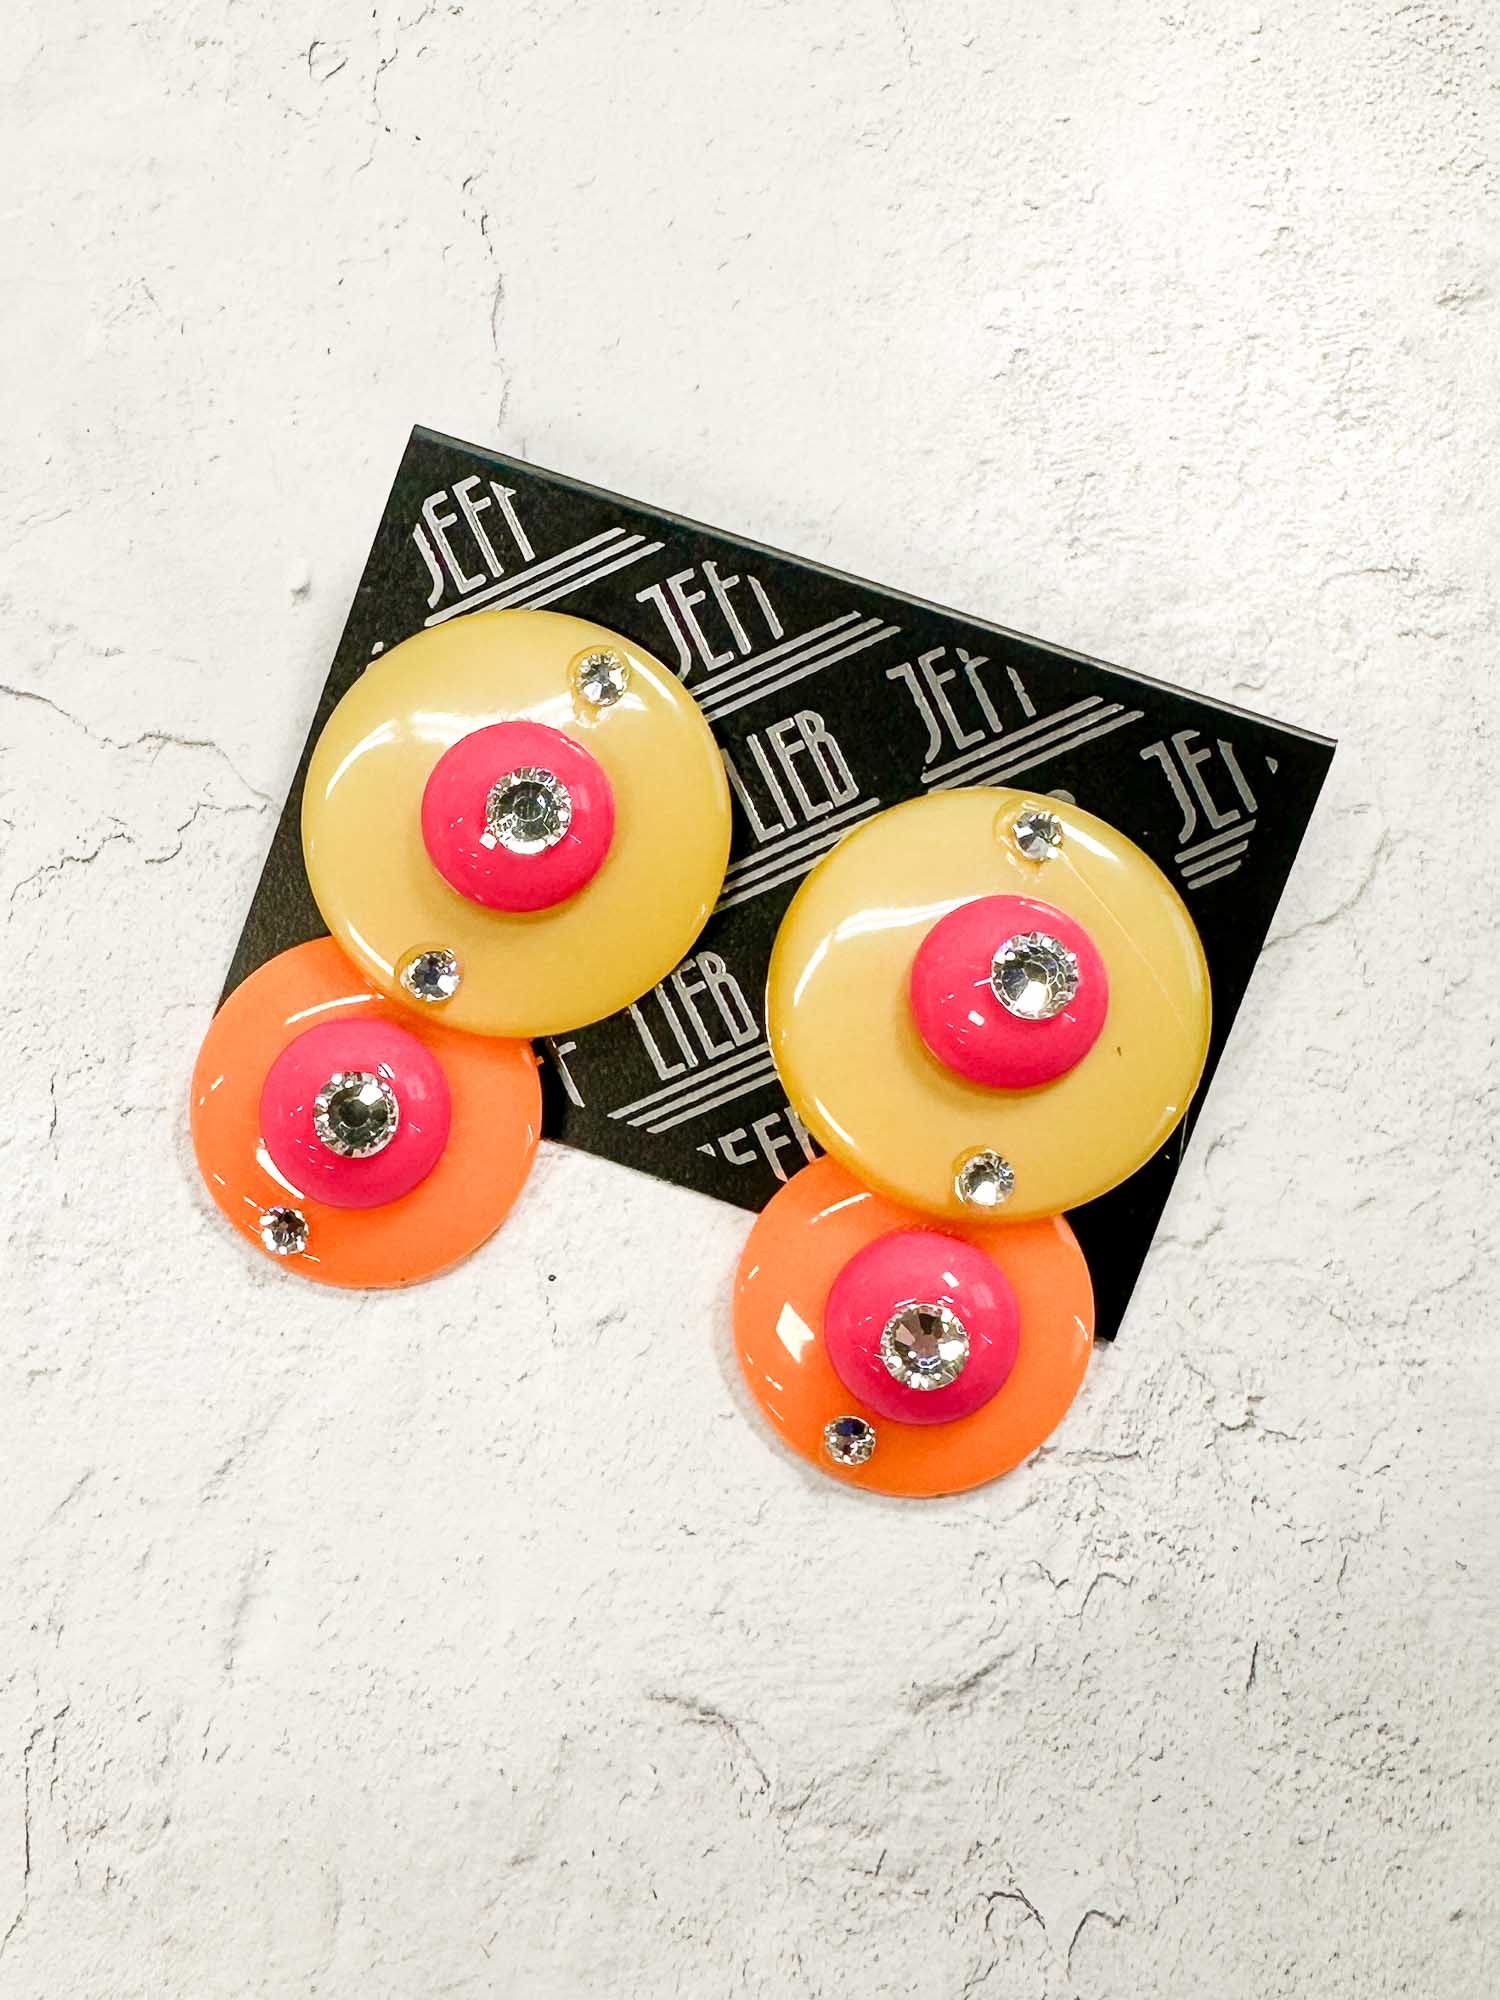 Jeff Lieb Total Design Jewelry Round Deco Drop Clip Earrings, Orange/Pink/Yellow - Statement Boutique